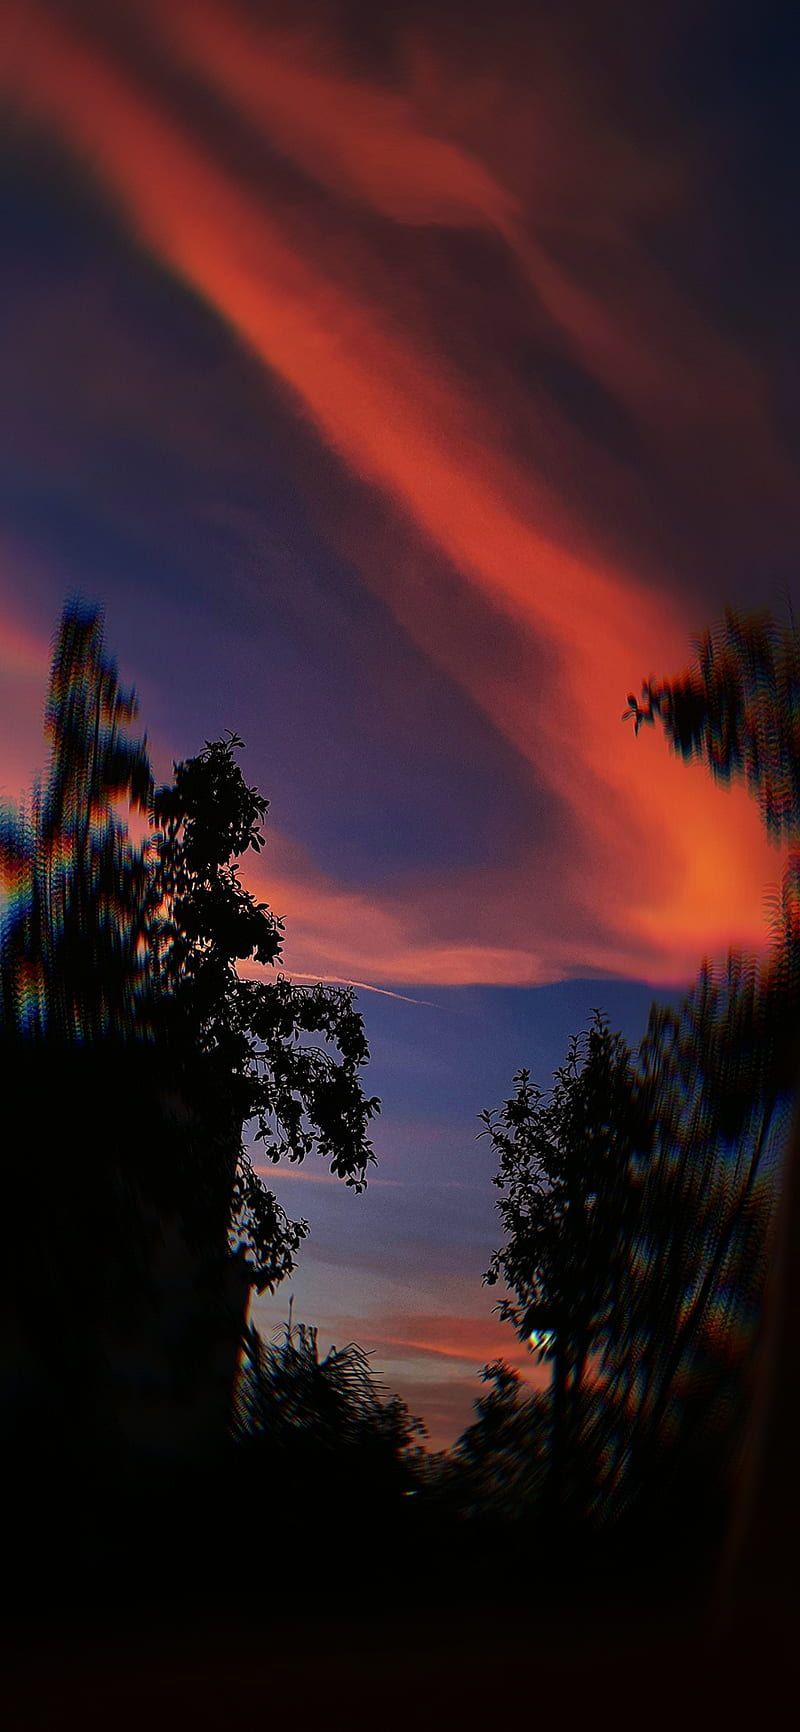 A red and blue sunset sky with a tree in the foreground. - Sunset, sunrise, Florida